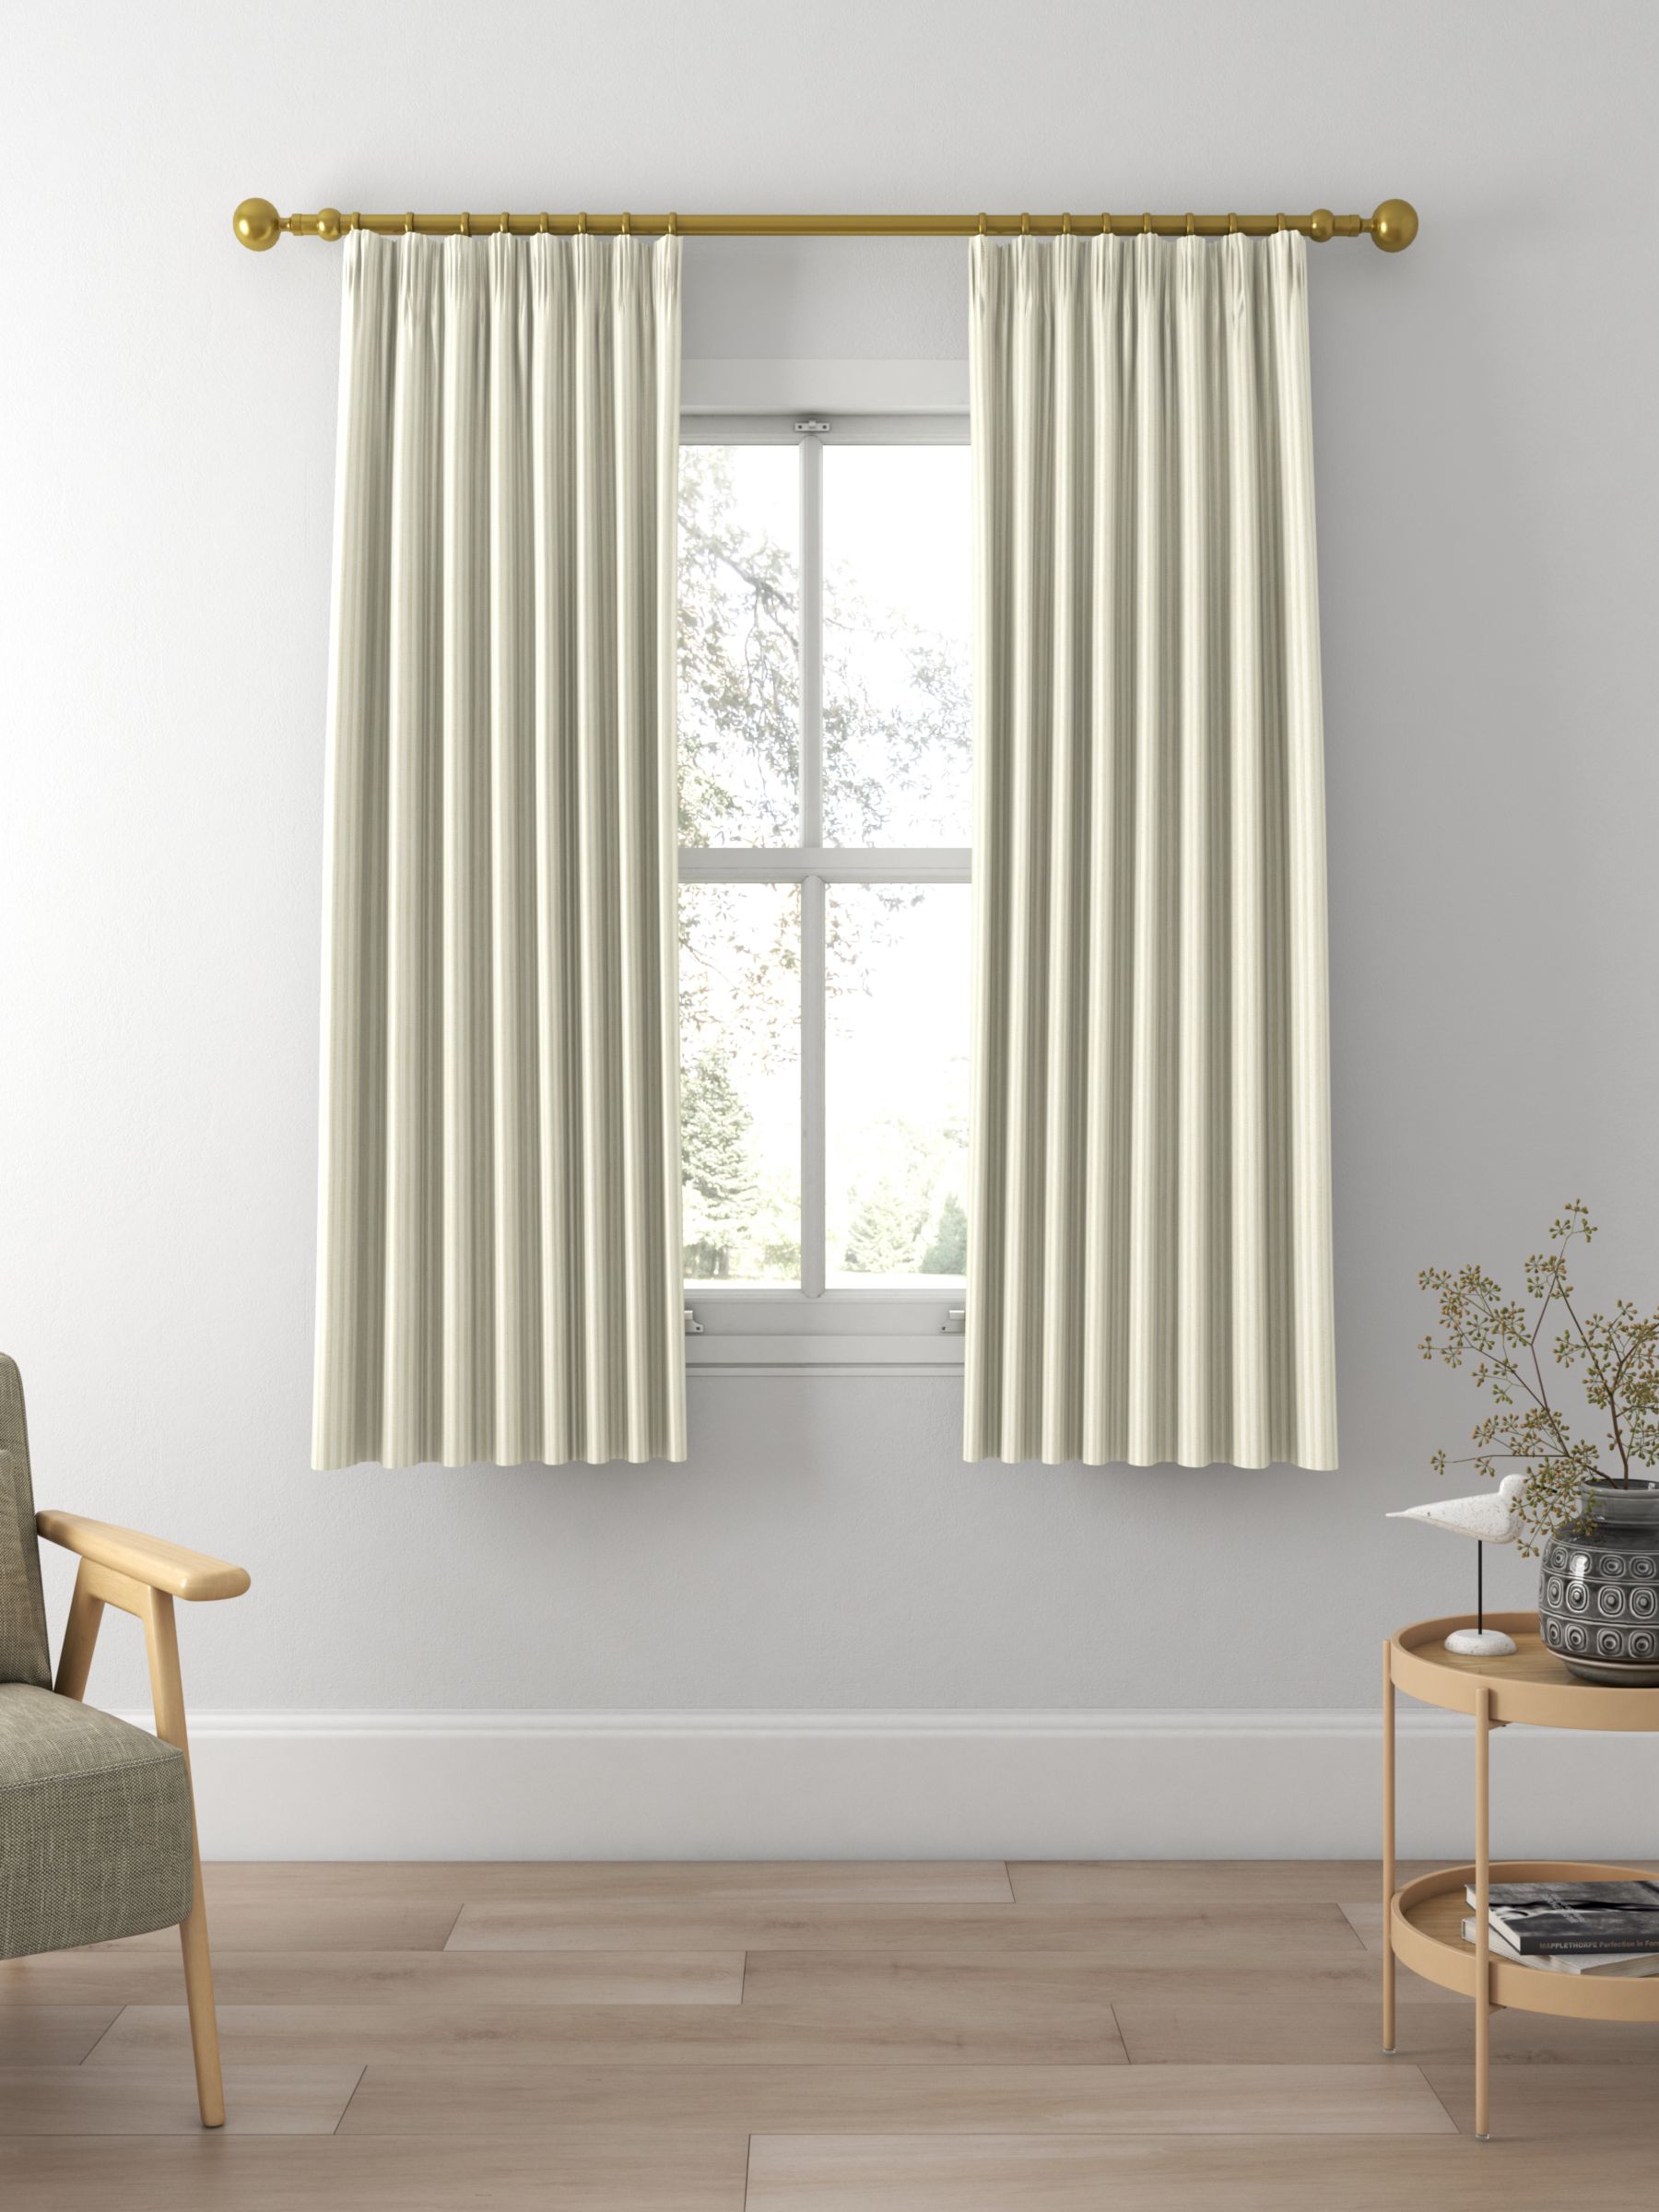 Sanderson Melford Made to Measure Curtains, Natural